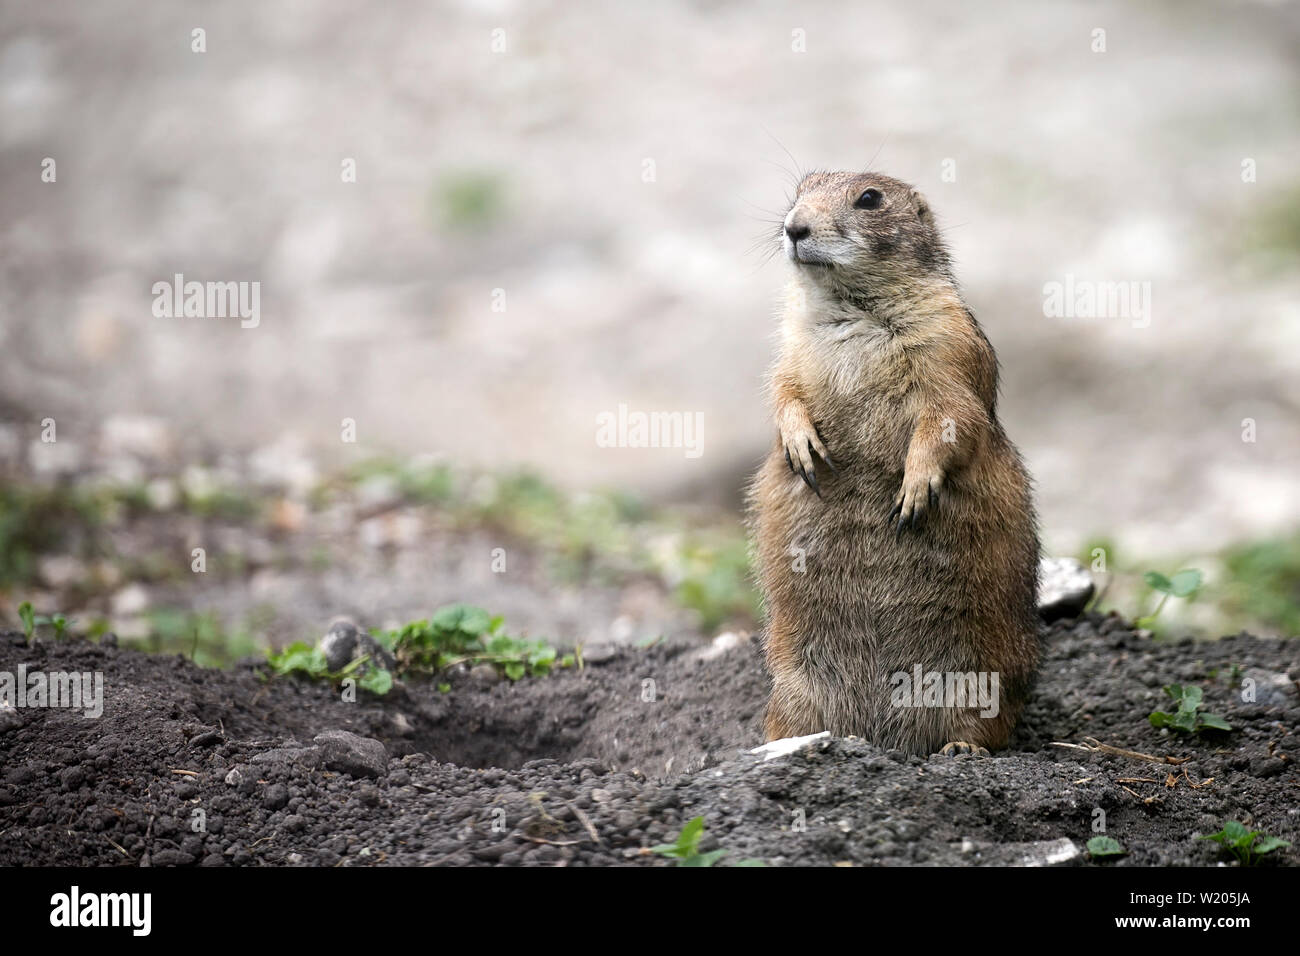 European ground squirrel in a clearing Stock Photo